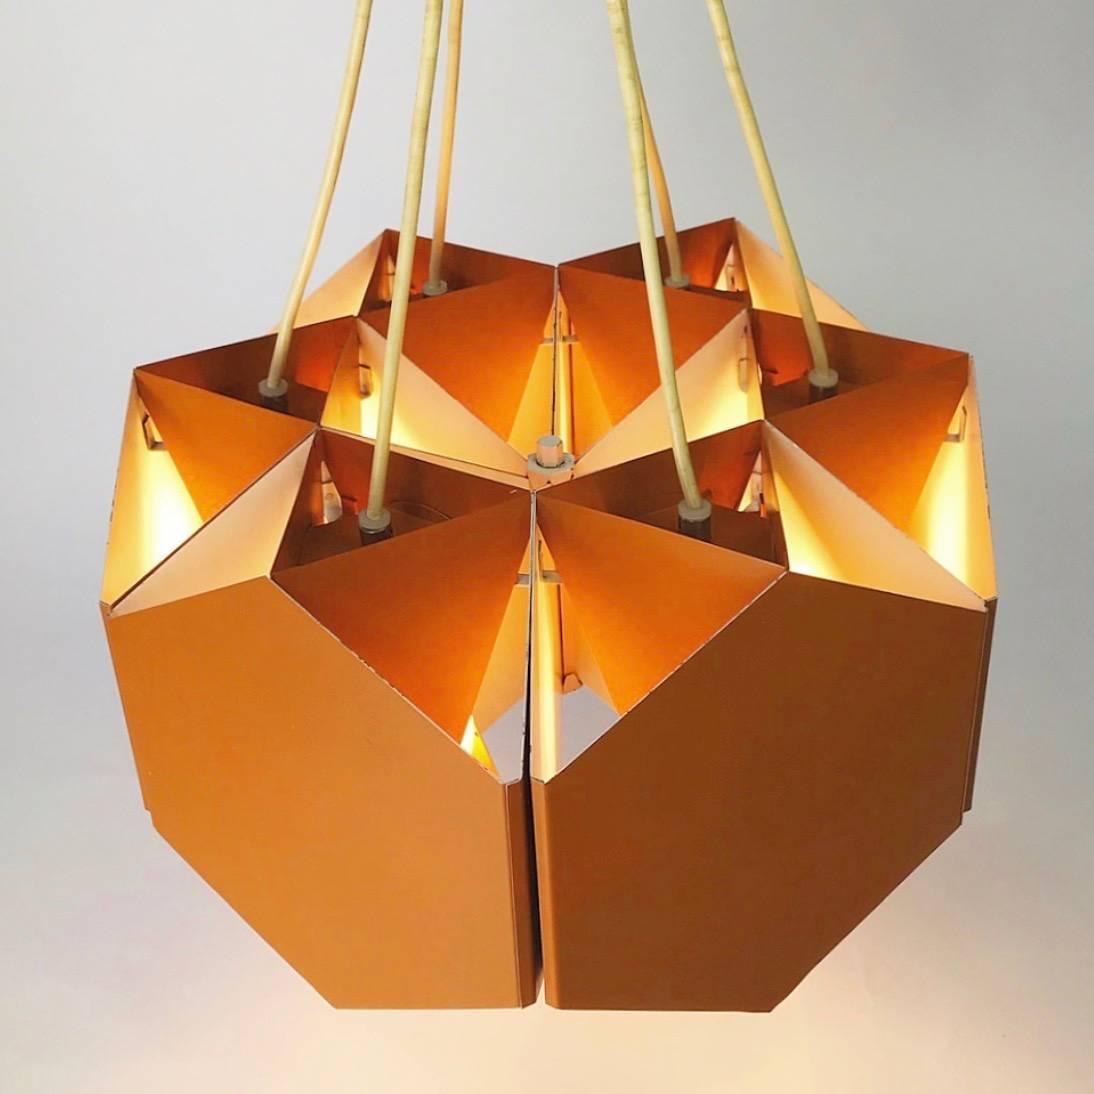 Great lighting design - like this astonishing masterpiece - is contemporary, functional and an eye-catcher.

One of ten ever made and never retailed but given as a gift to friends and associates. 

The “3/6” light combines all of these and then